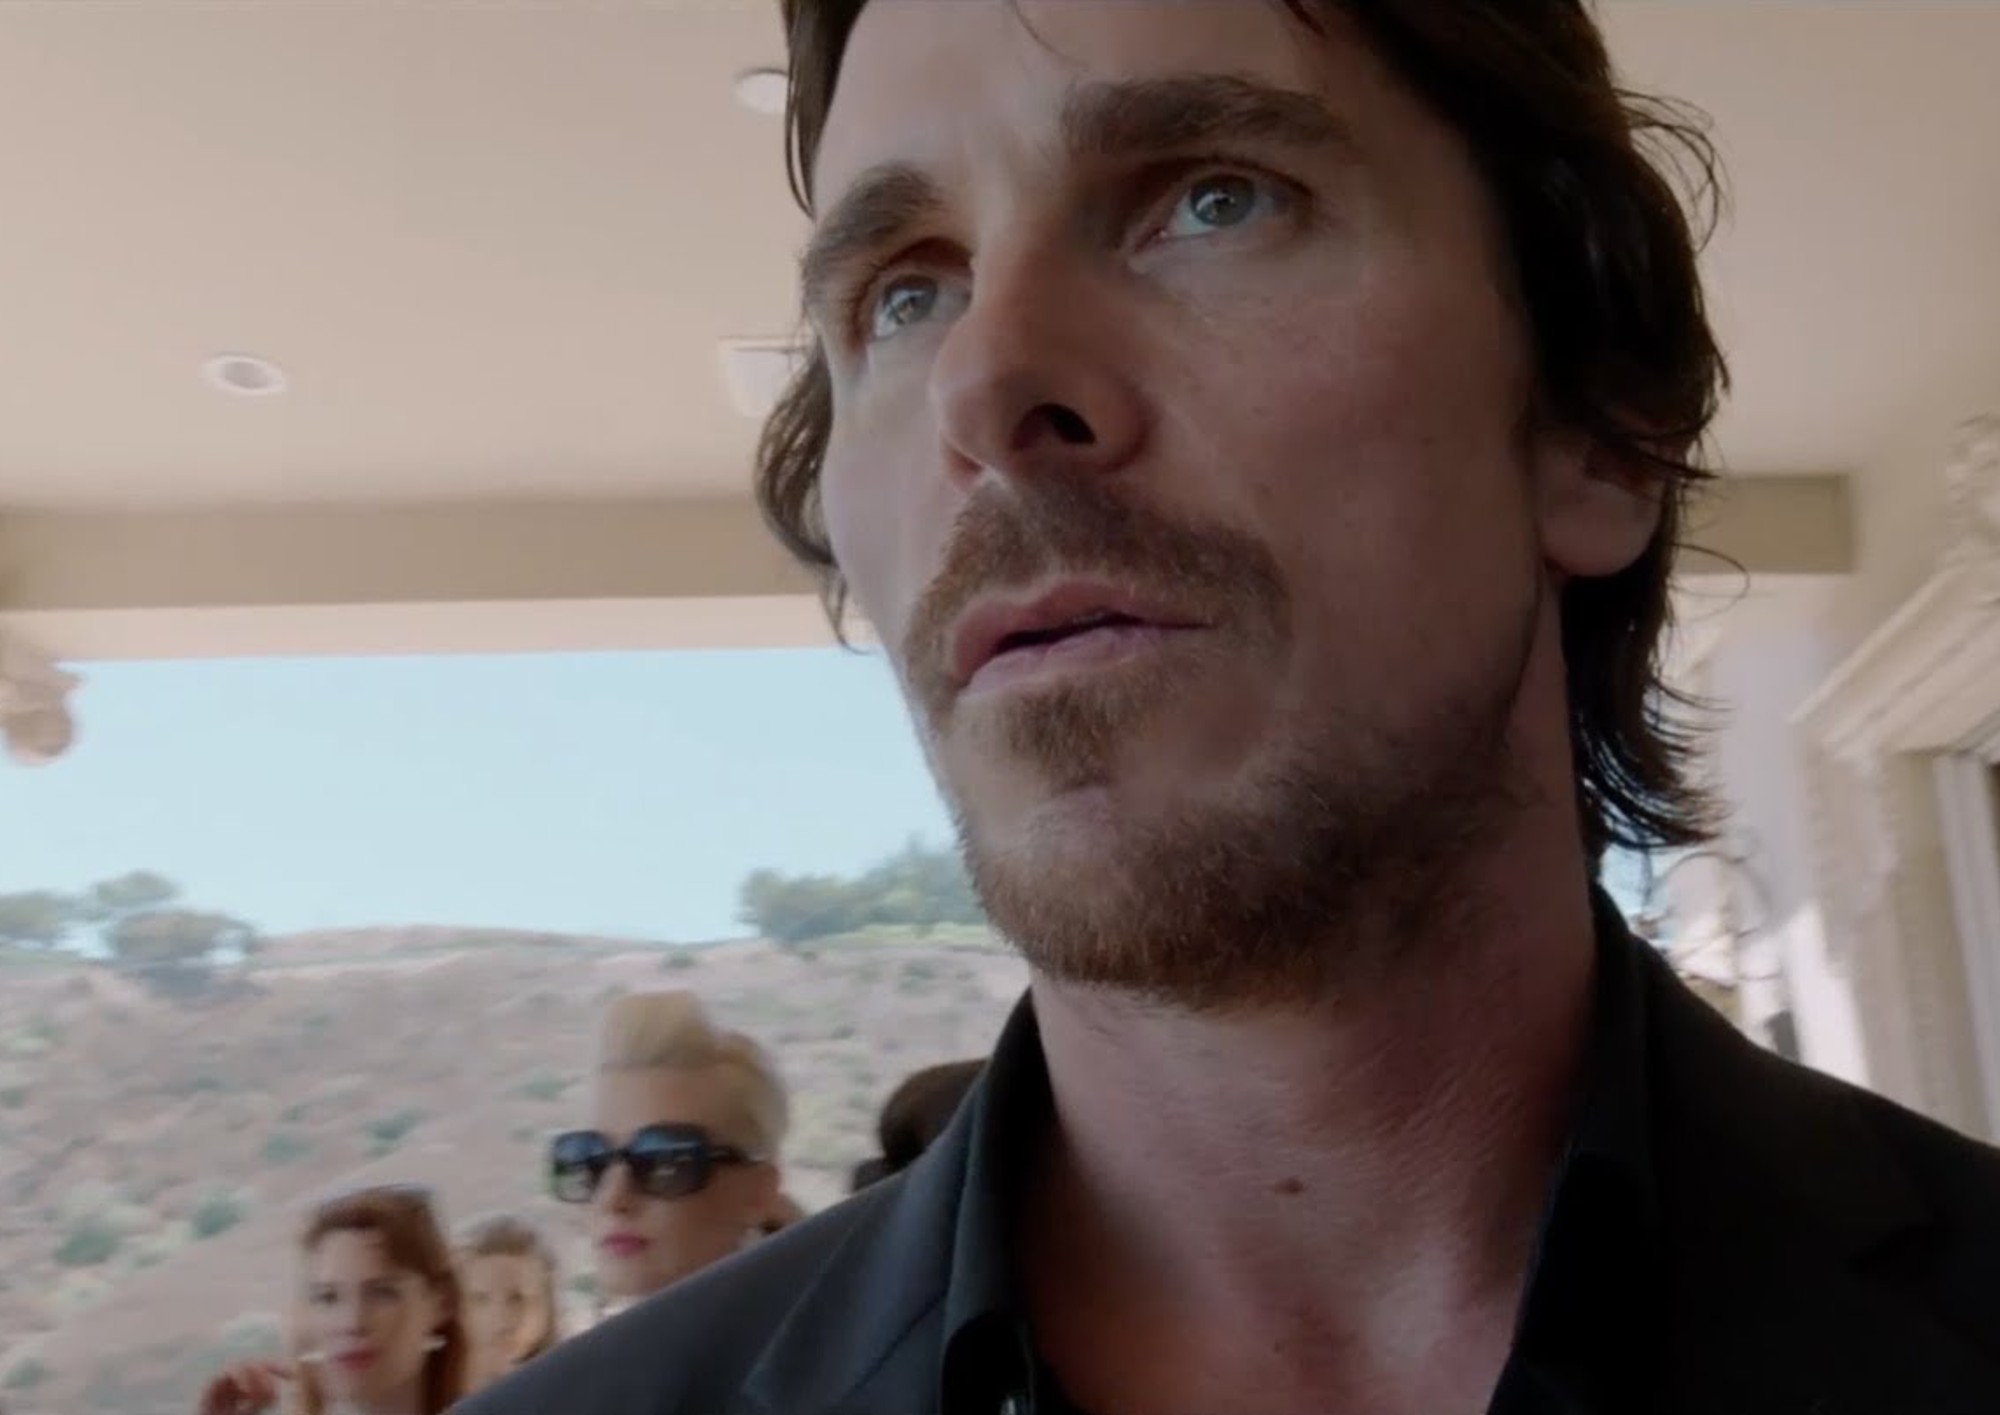 Image from the motion picture Knight of Cups